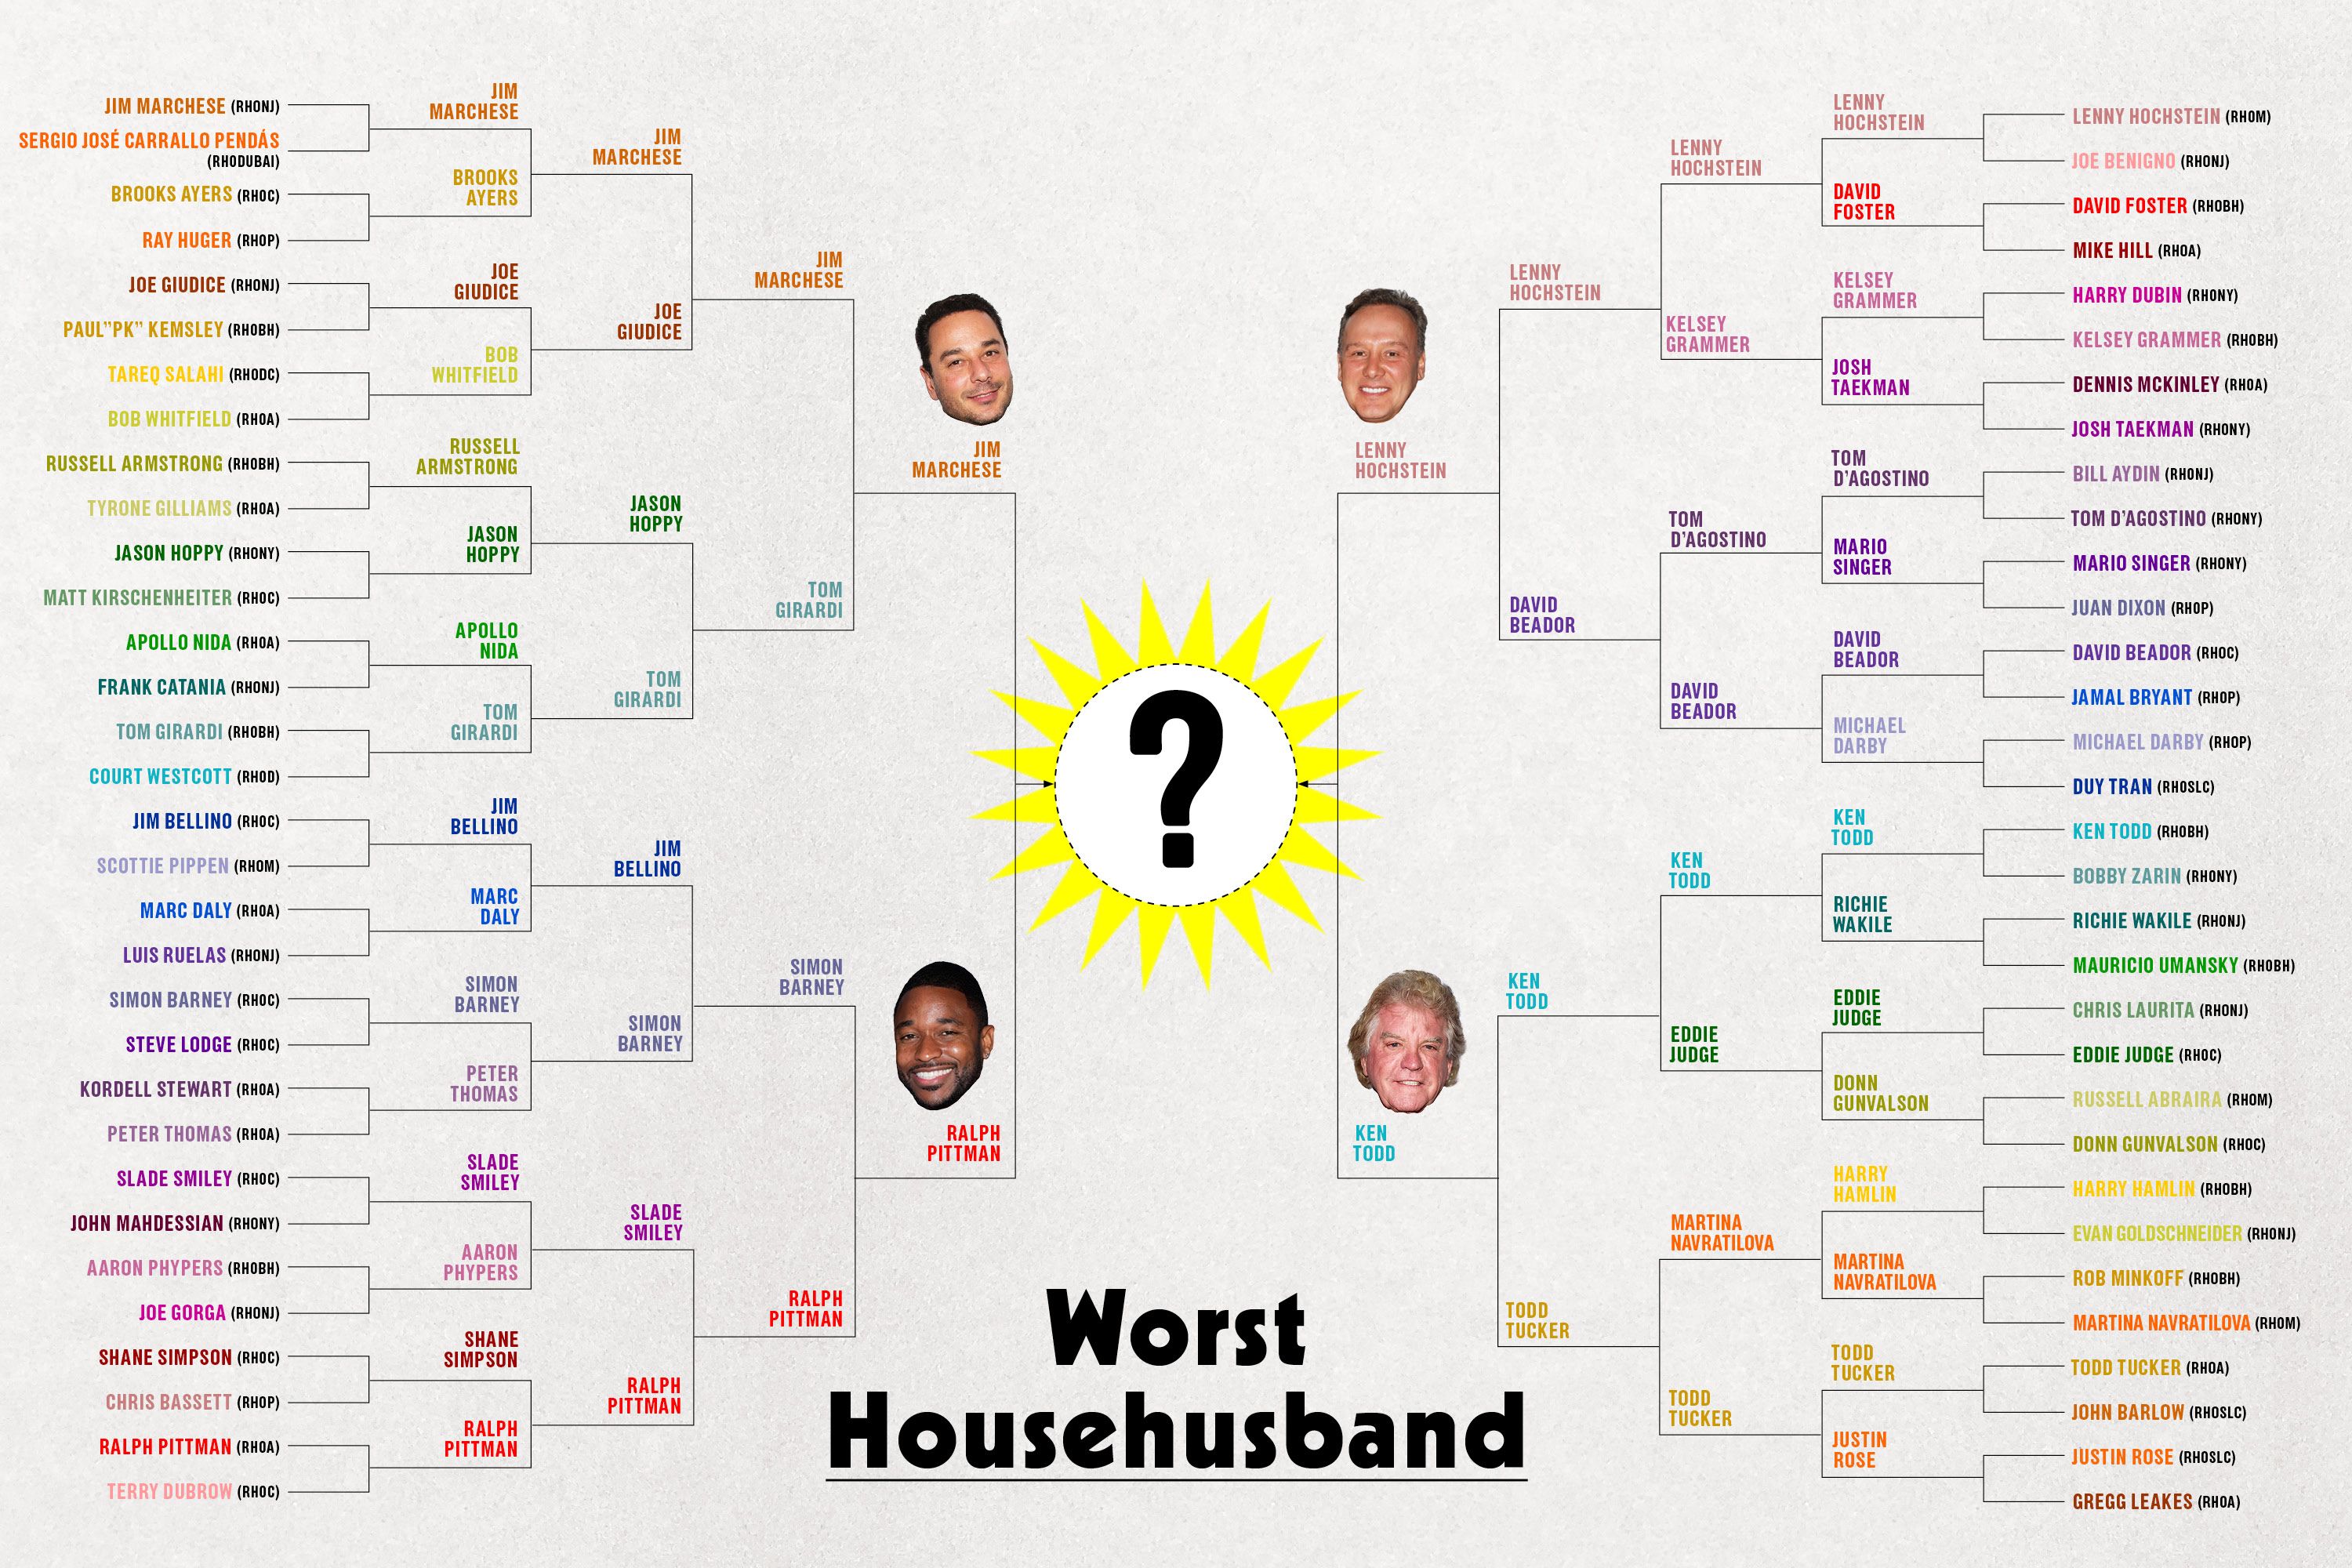 Housewives Institute Bulletin The Worst Househusband Ever picture